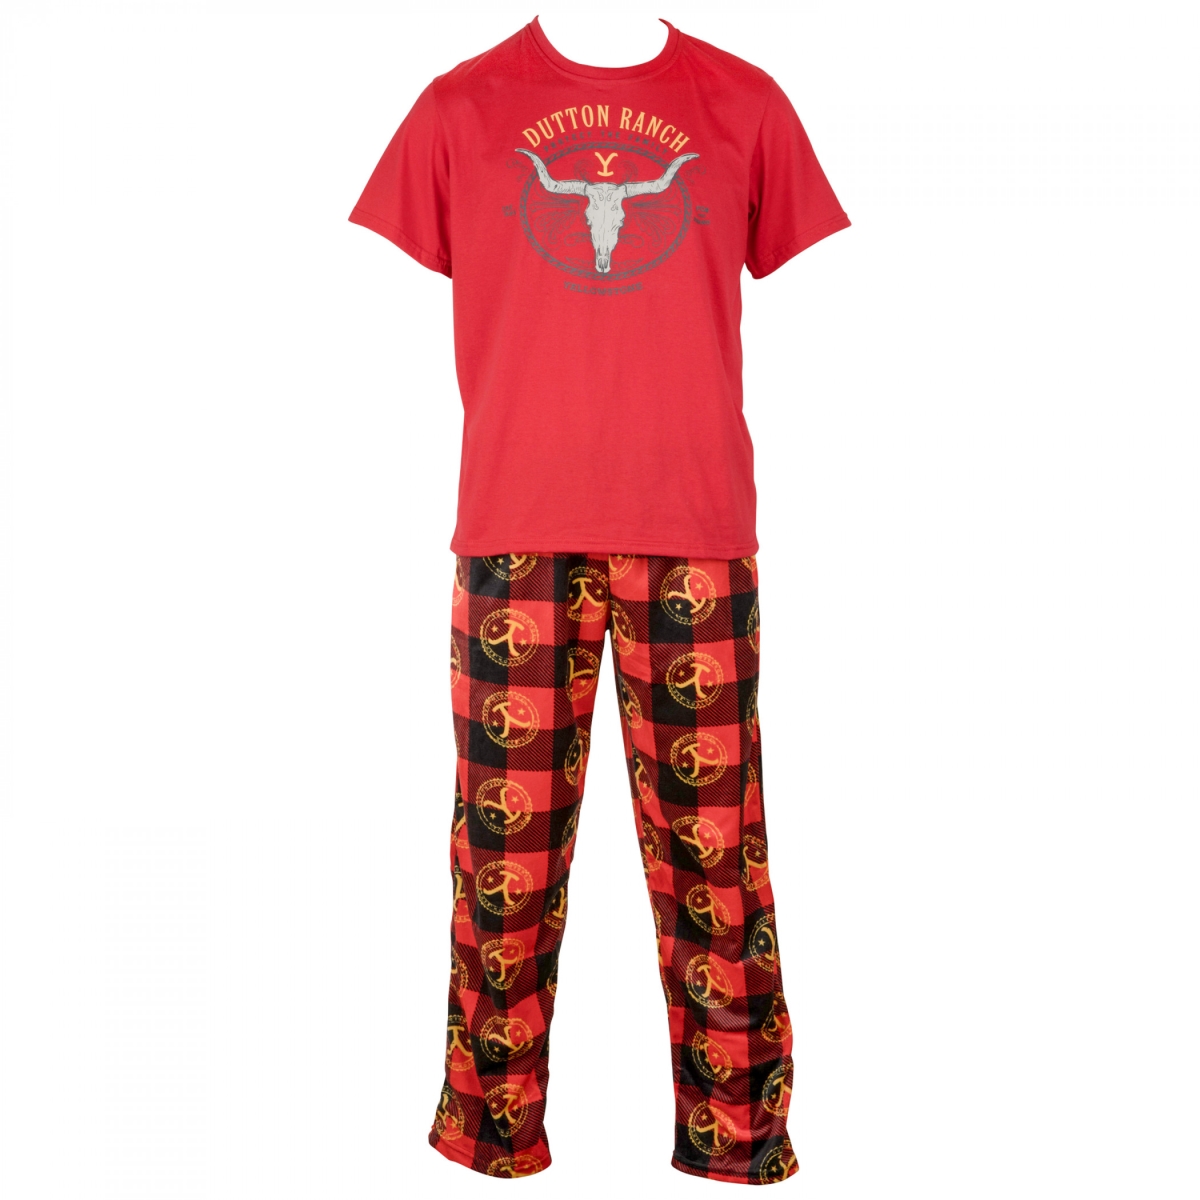 Picture of Yellowstone 866020-large-36- Yellowstone Dutton Ranch Logo Sleep Set - Large 36-38 - 3 Piece